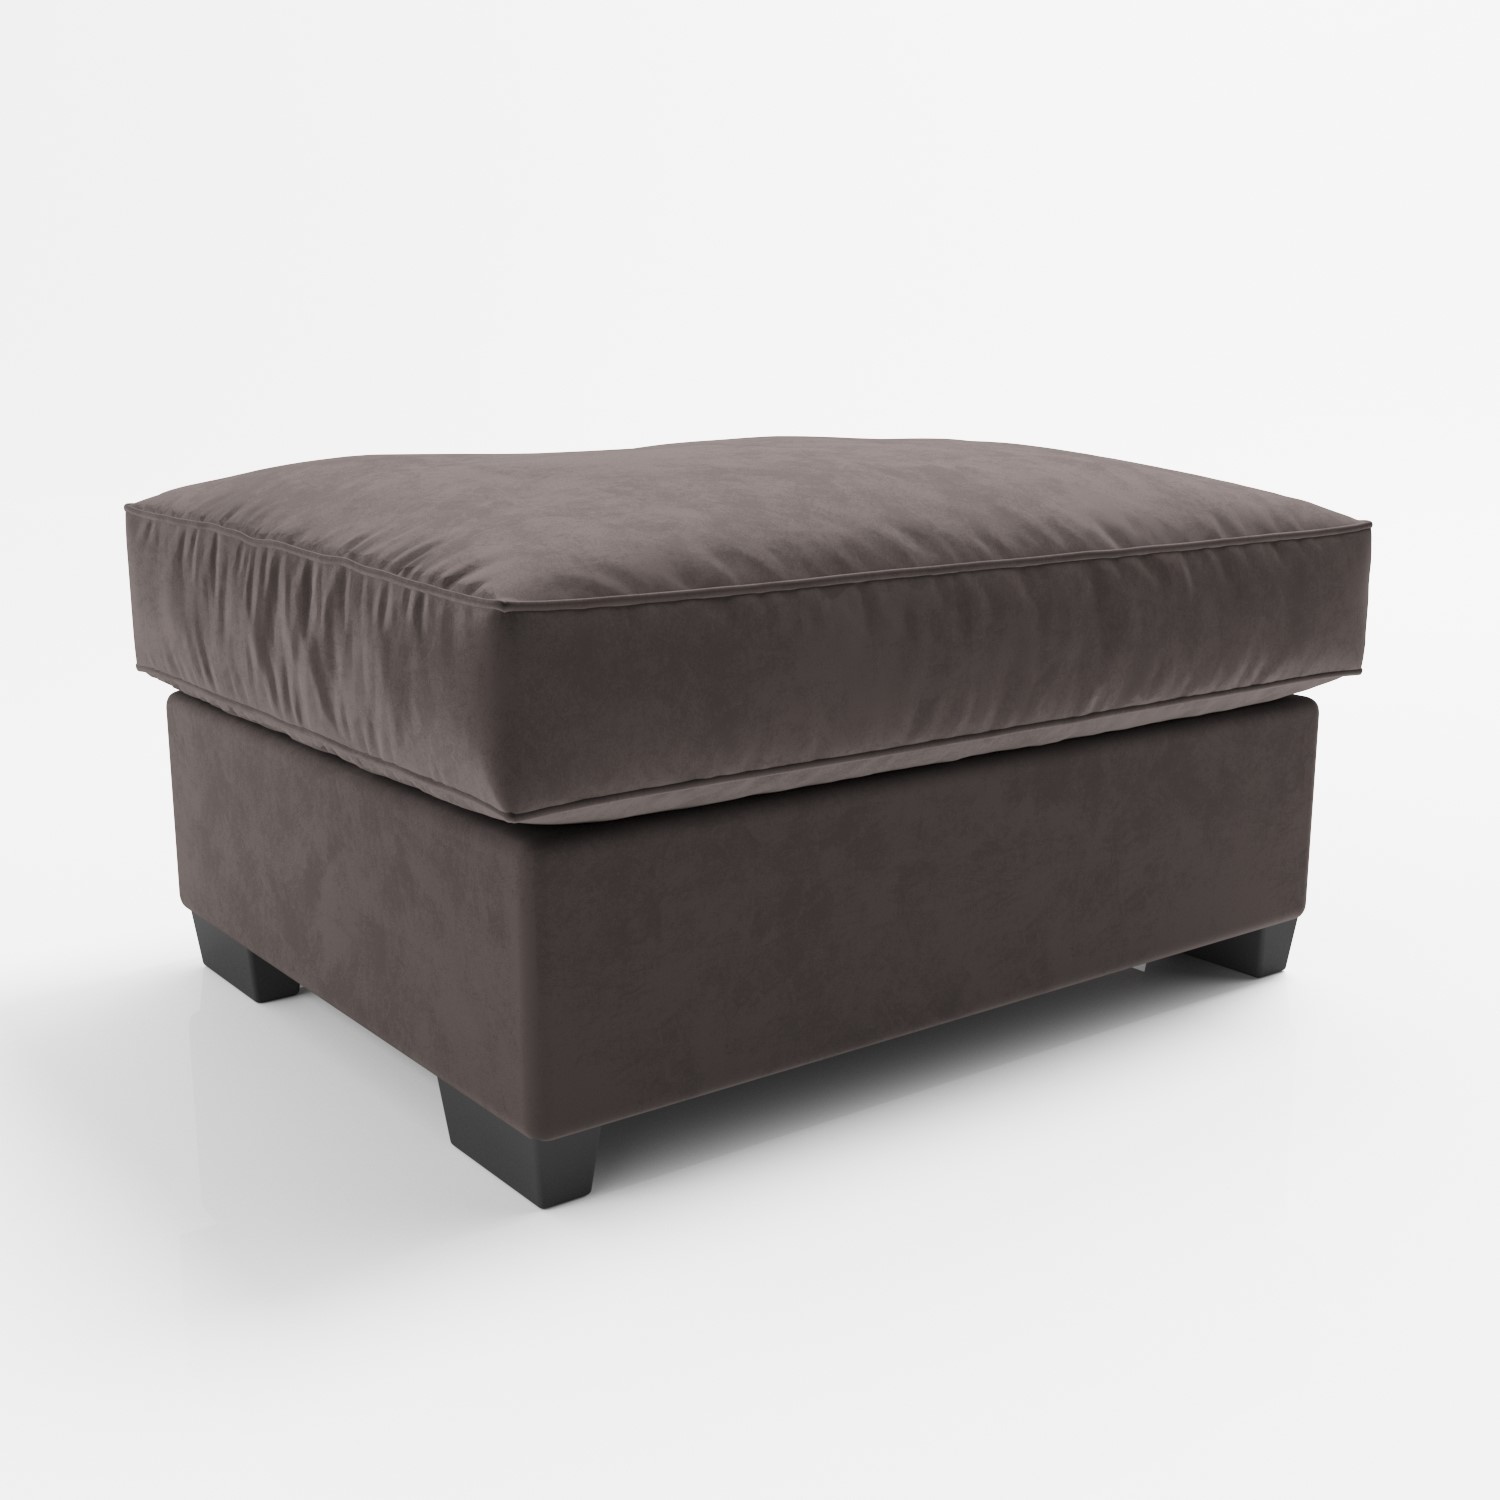 Read more about Footstool in mink velvet madison